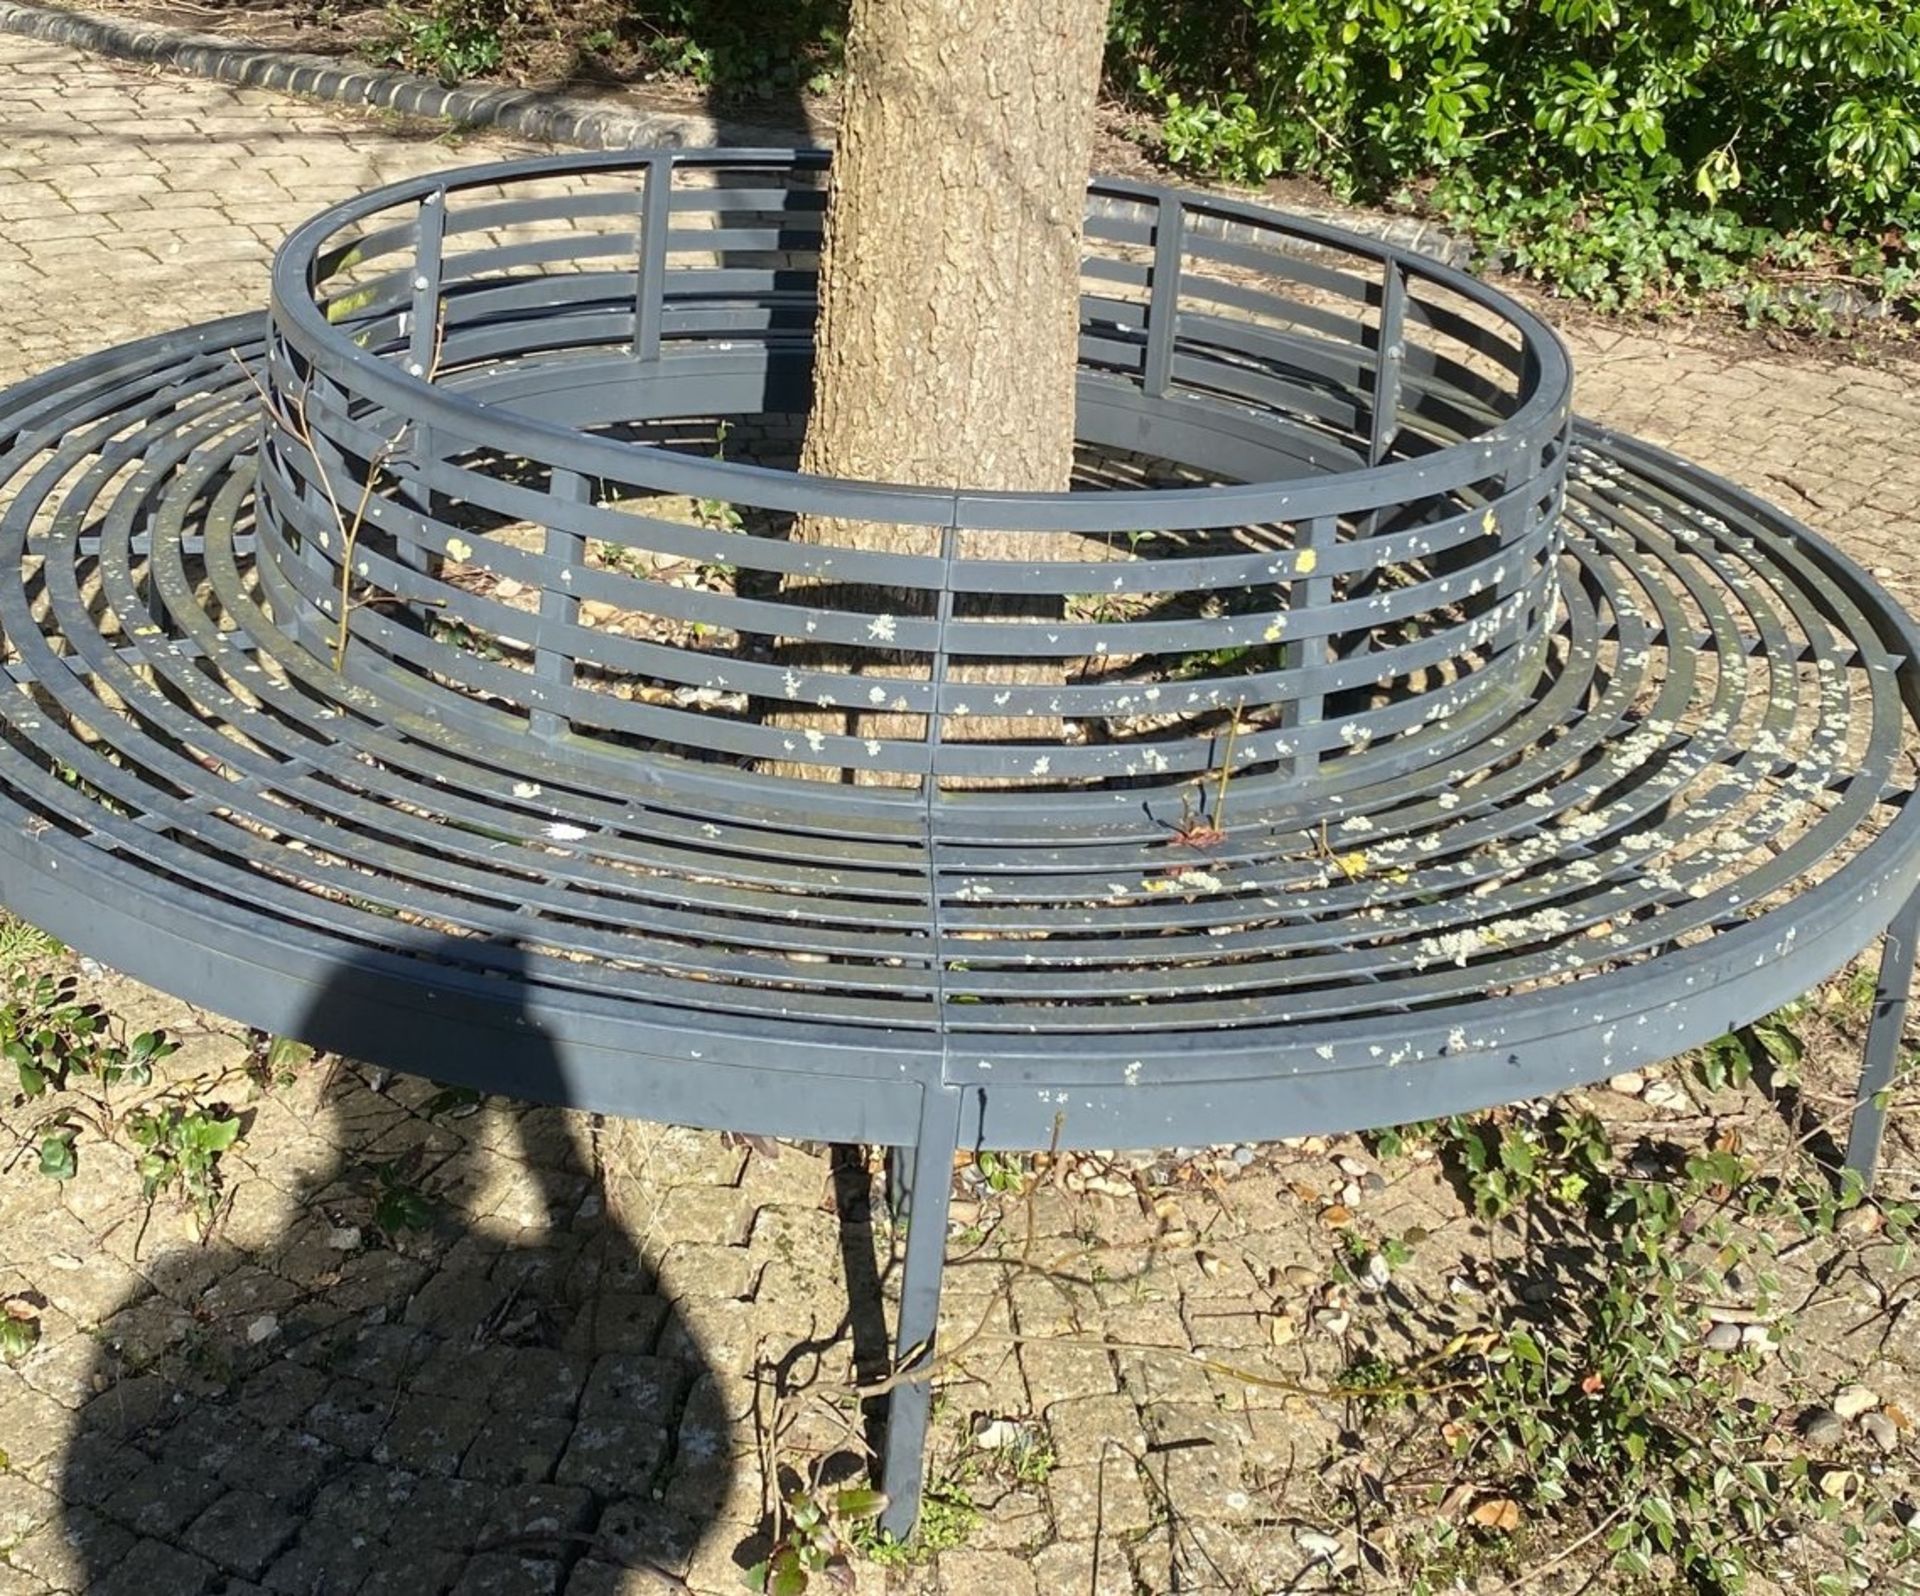 1 x Round Metal Seating Tree Bench With Slatted Seats / Backrests - Diameter: 250cms - Image 4 of 4